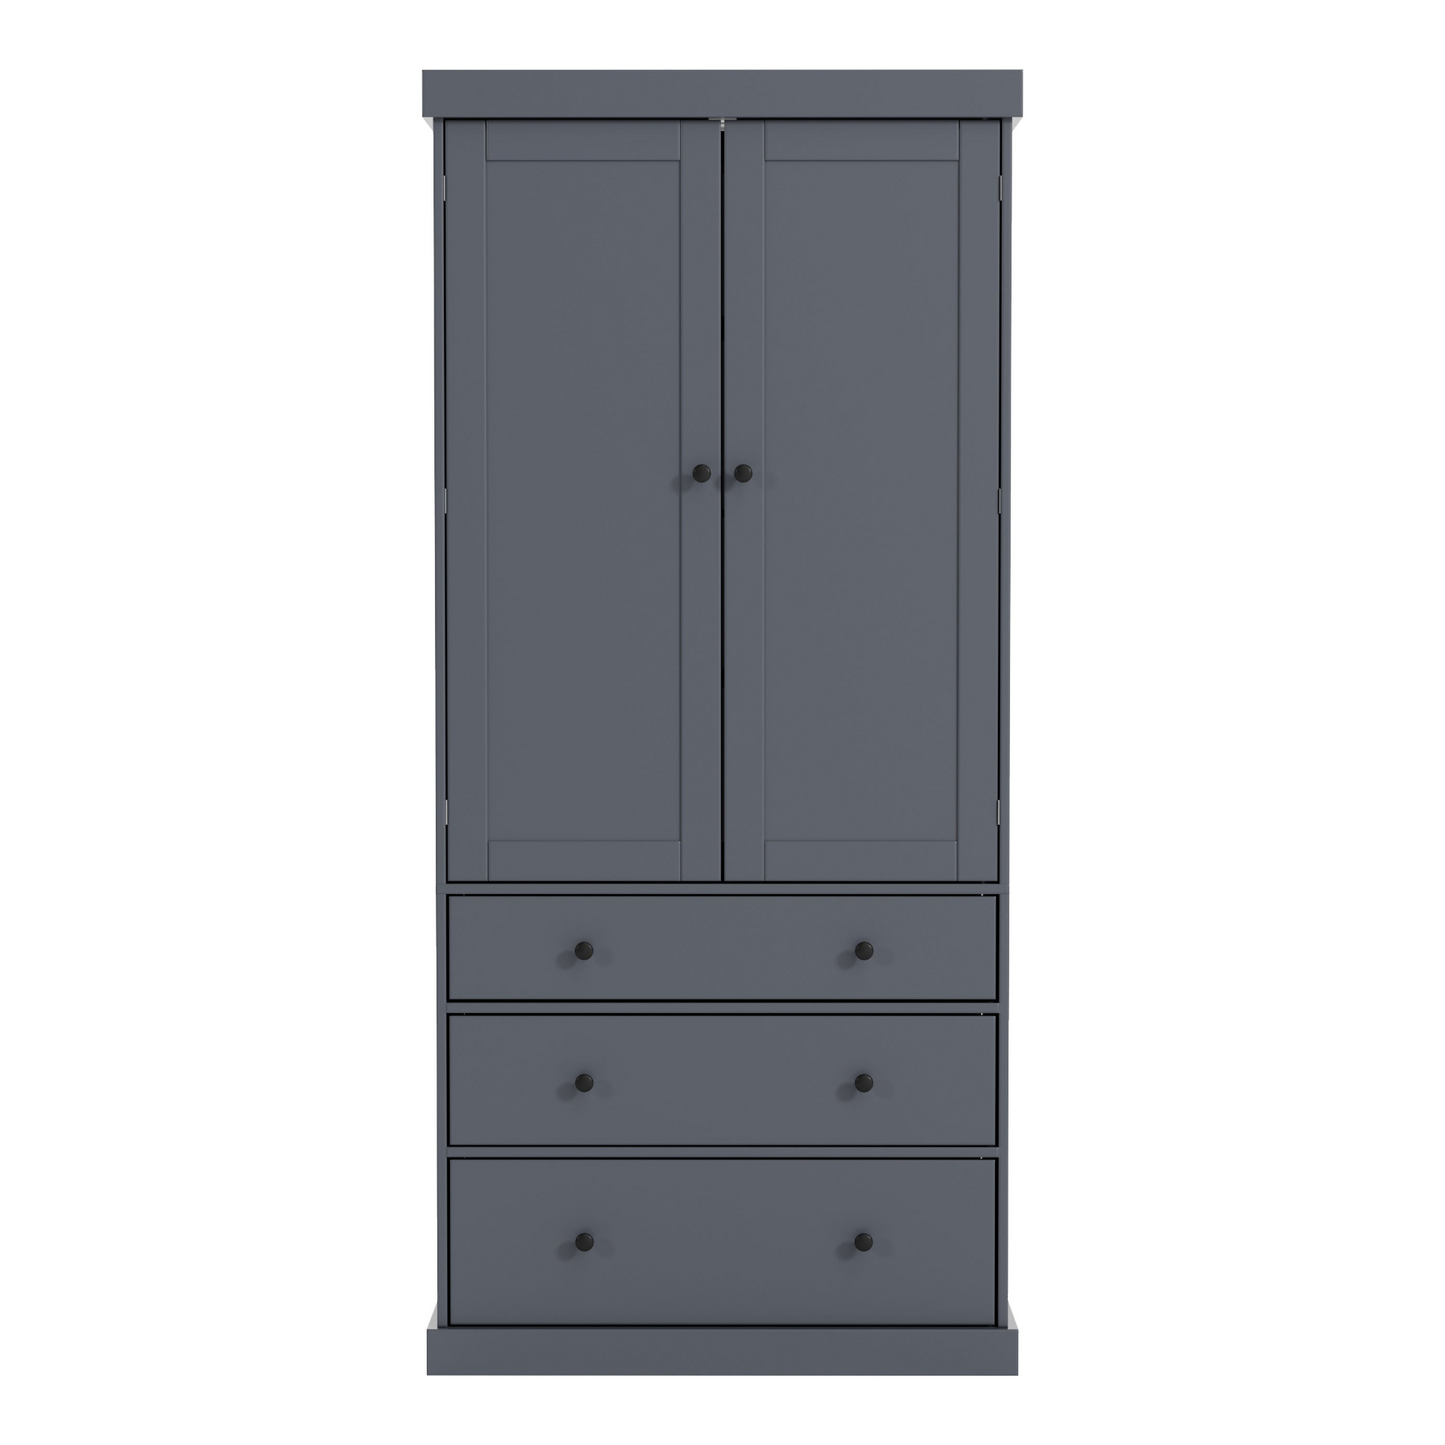 77inch Farmhouse Kitchen Pantry, Freestanding Tall Cupboard Storage Cabinet with 3 Adjustable Shelves, 8 Door Shelves, 3 Drawers for Kitchen, Dining Room, Gray